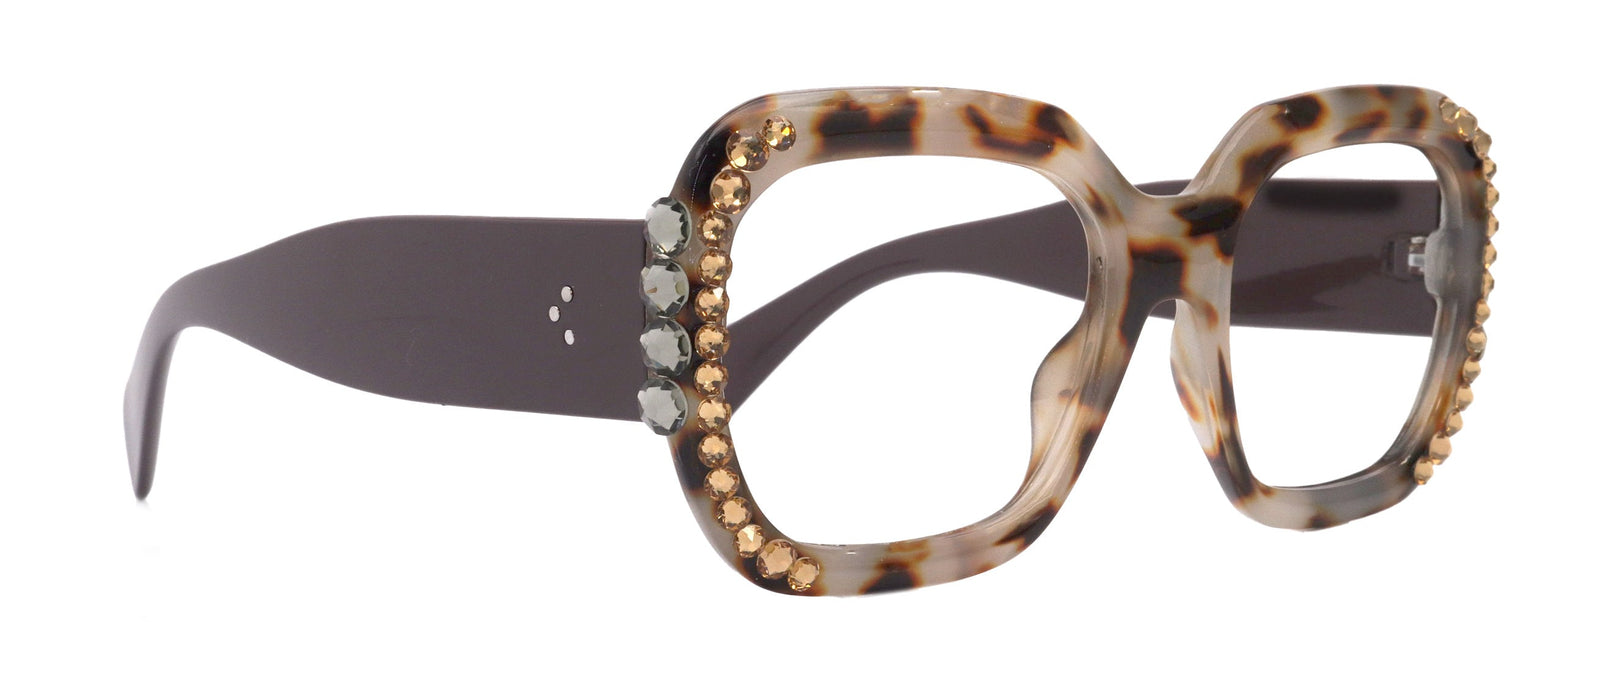 Oversized Bling Reading Glasses, Brown , Large Frame, High End Readers, Bifocal, Sun readers, Trendy Style, NY Fifth Avenue